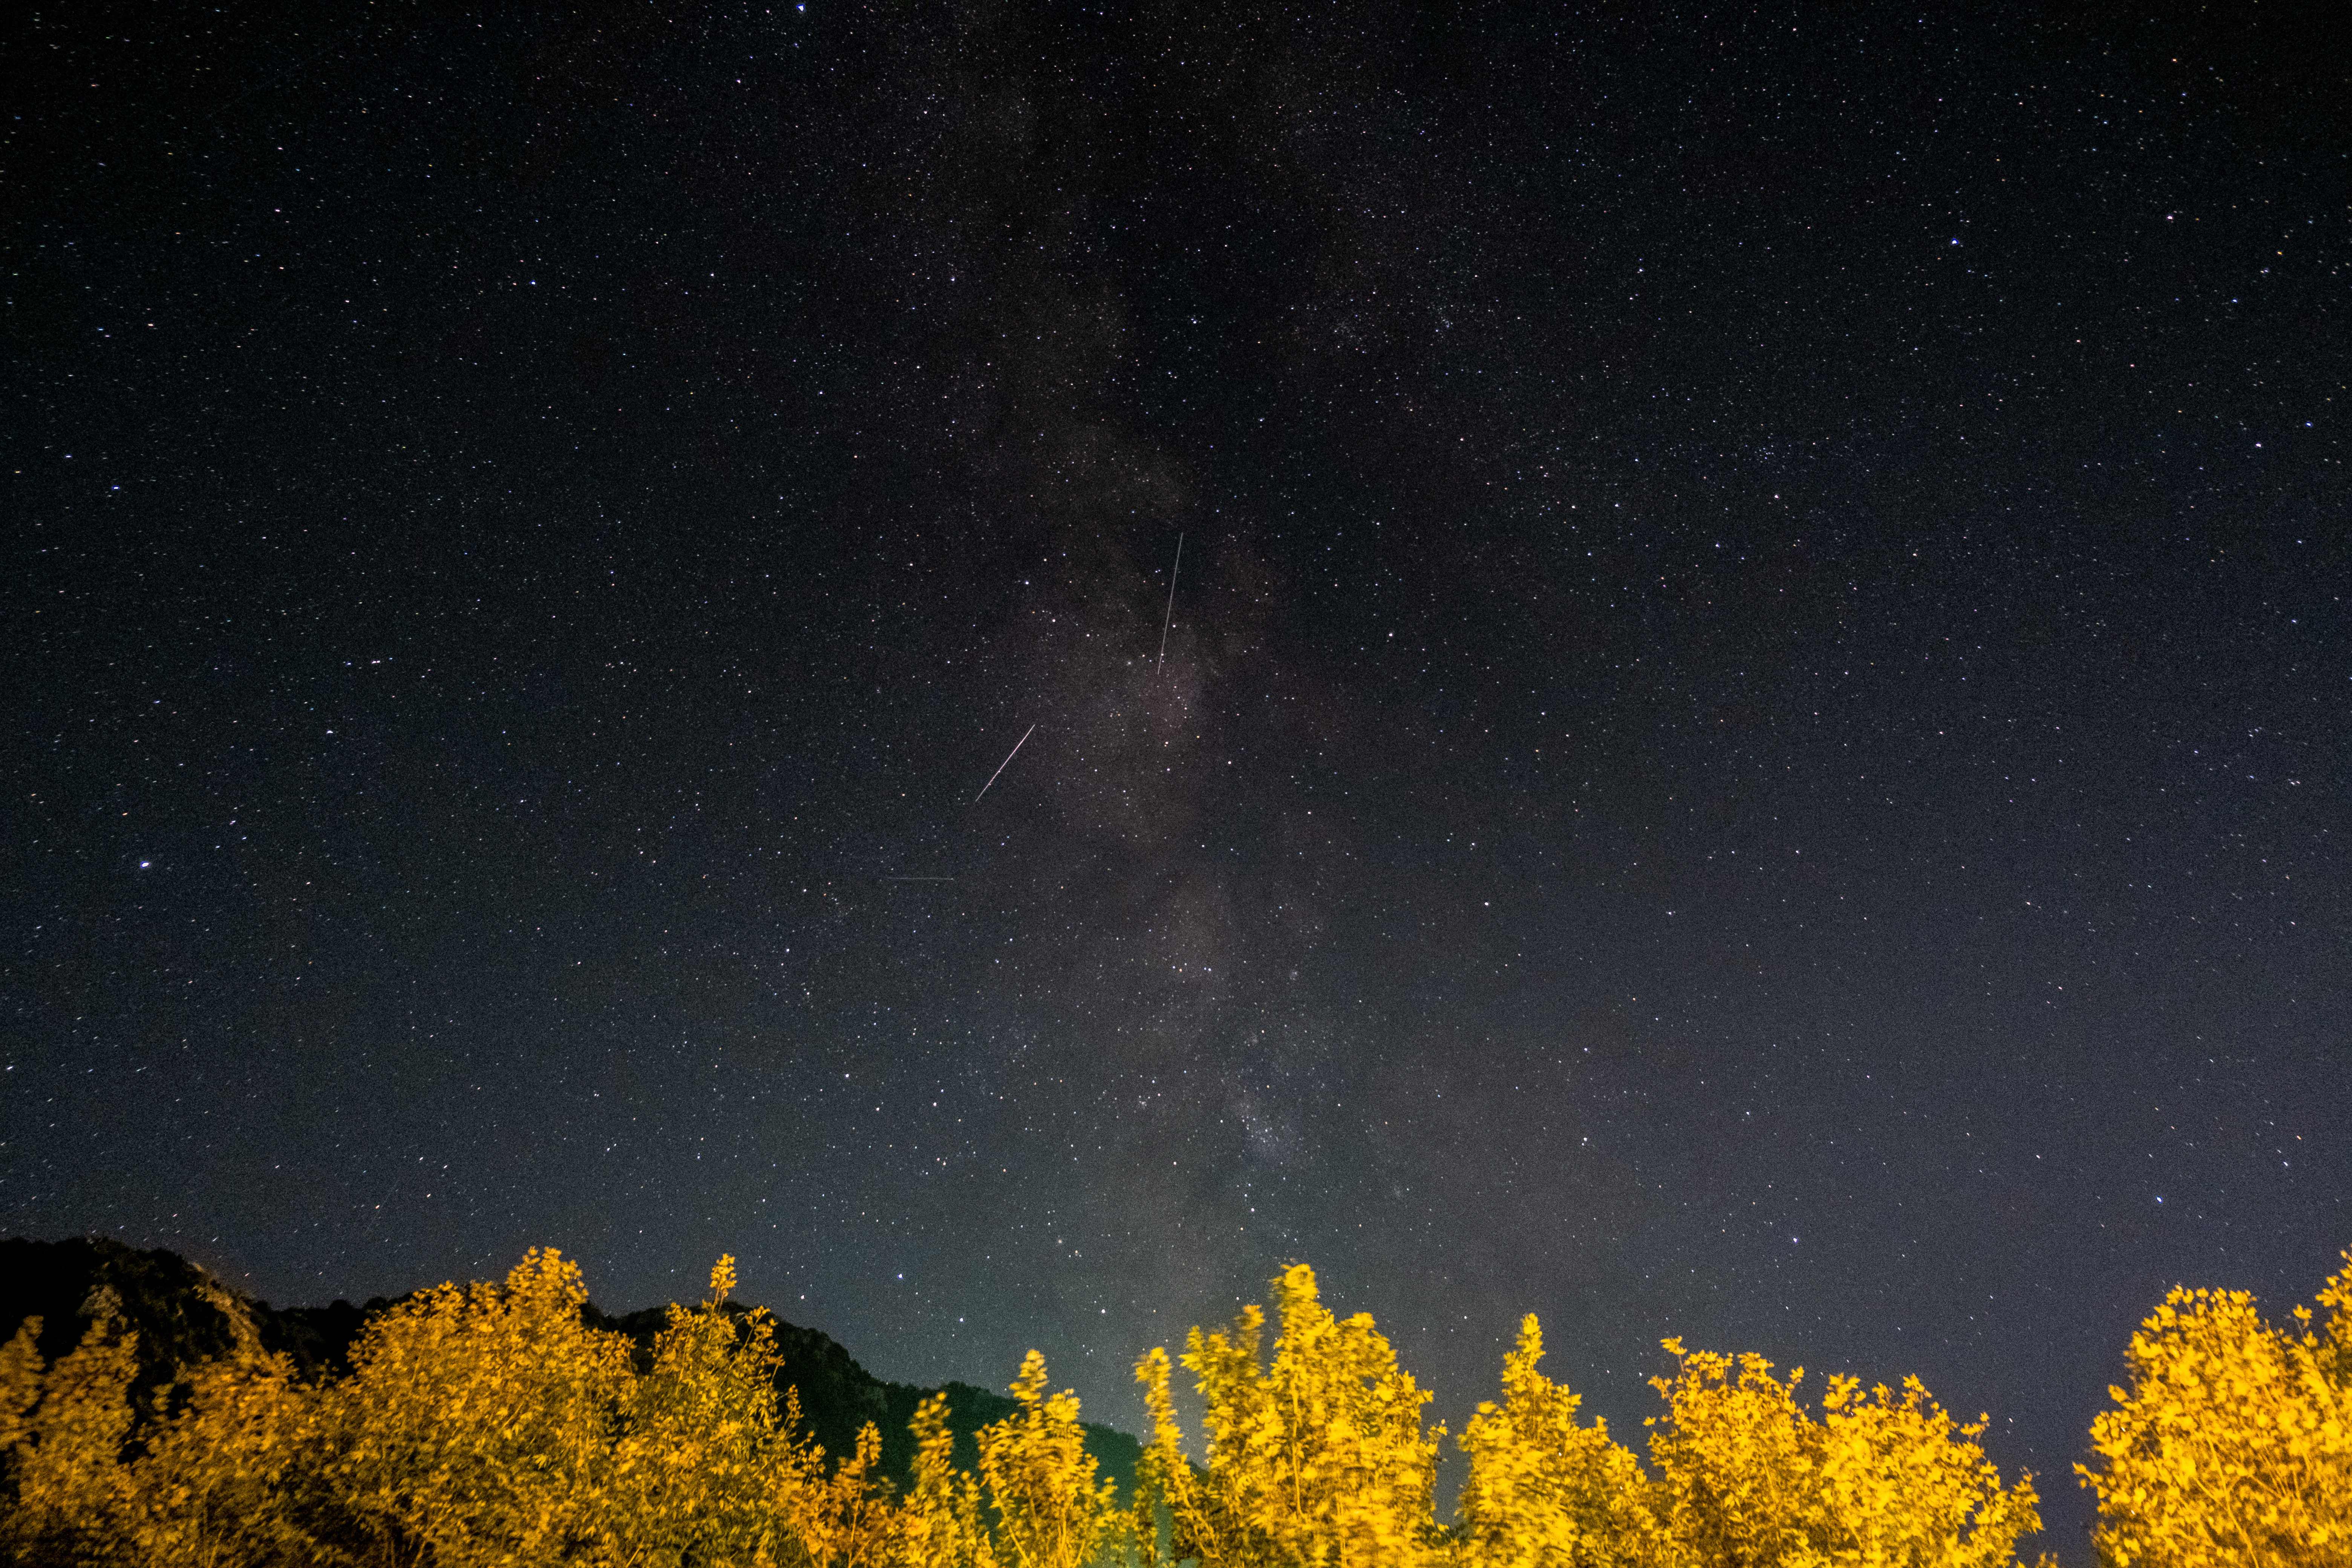 A photograph of the Orionid meteor shower in the night sky over Tannourine in northern Lebanon, on October 3, 2021.